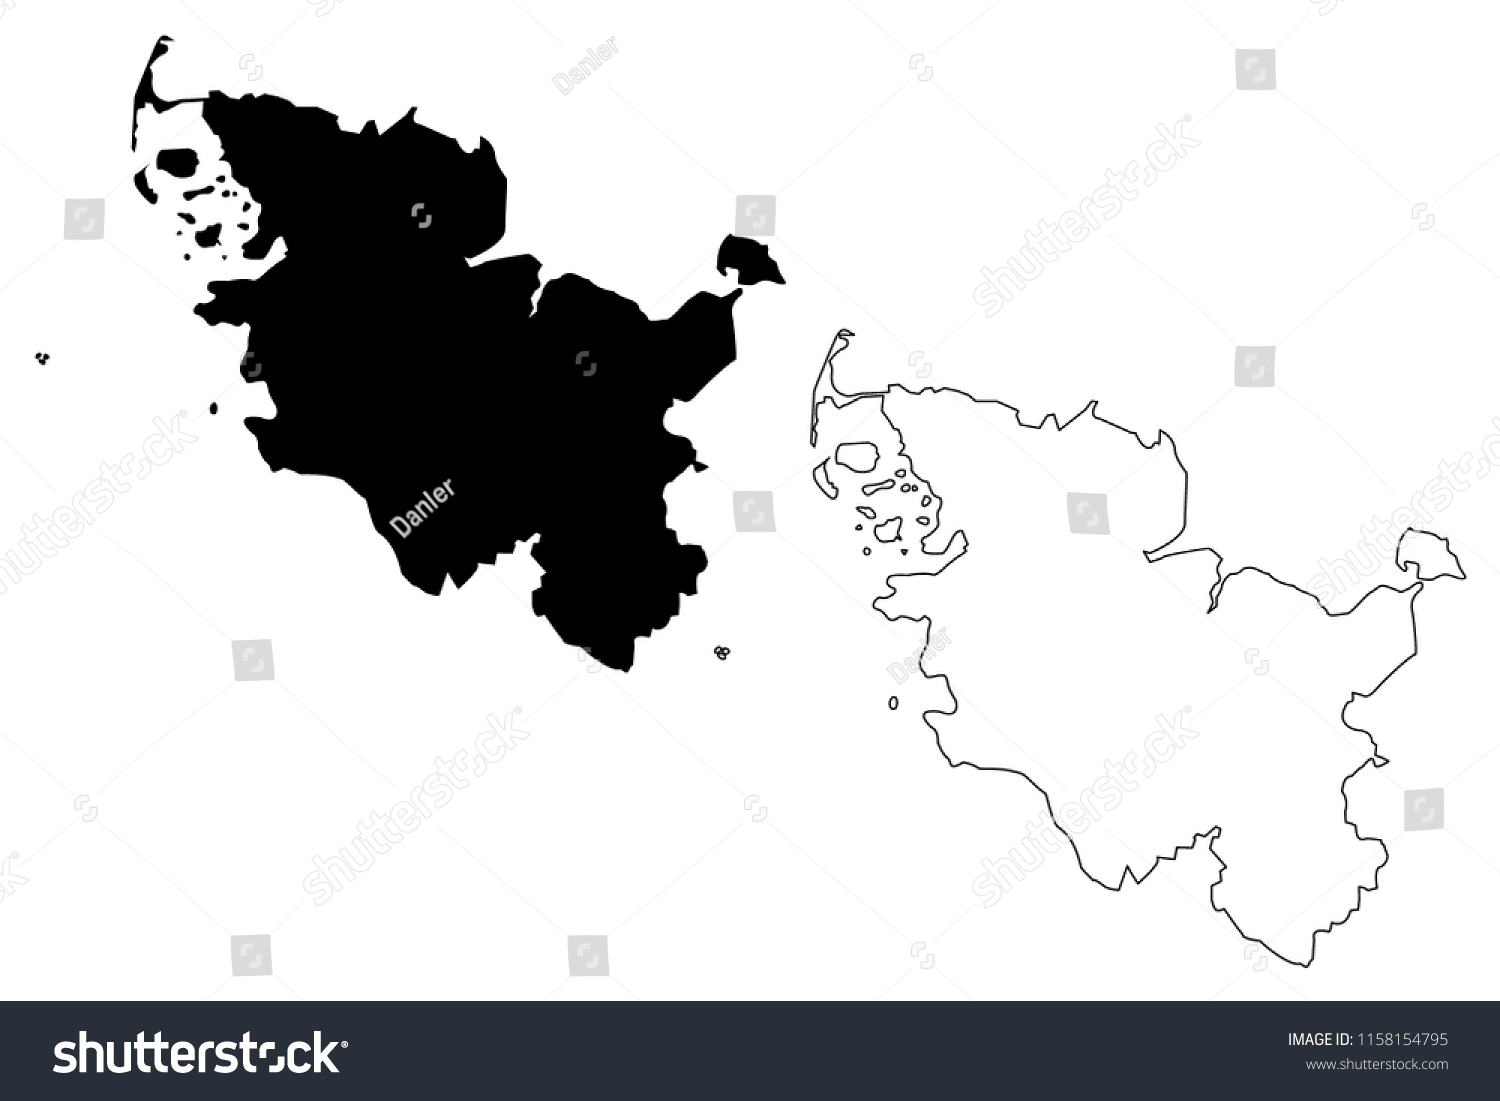 SVG of Schleswig-Holstein (Federal Republic of Germany, State of Germany, Sleswick-Holsatia) map vector illustration, scribble sketch Schleswig-Holstein map svg